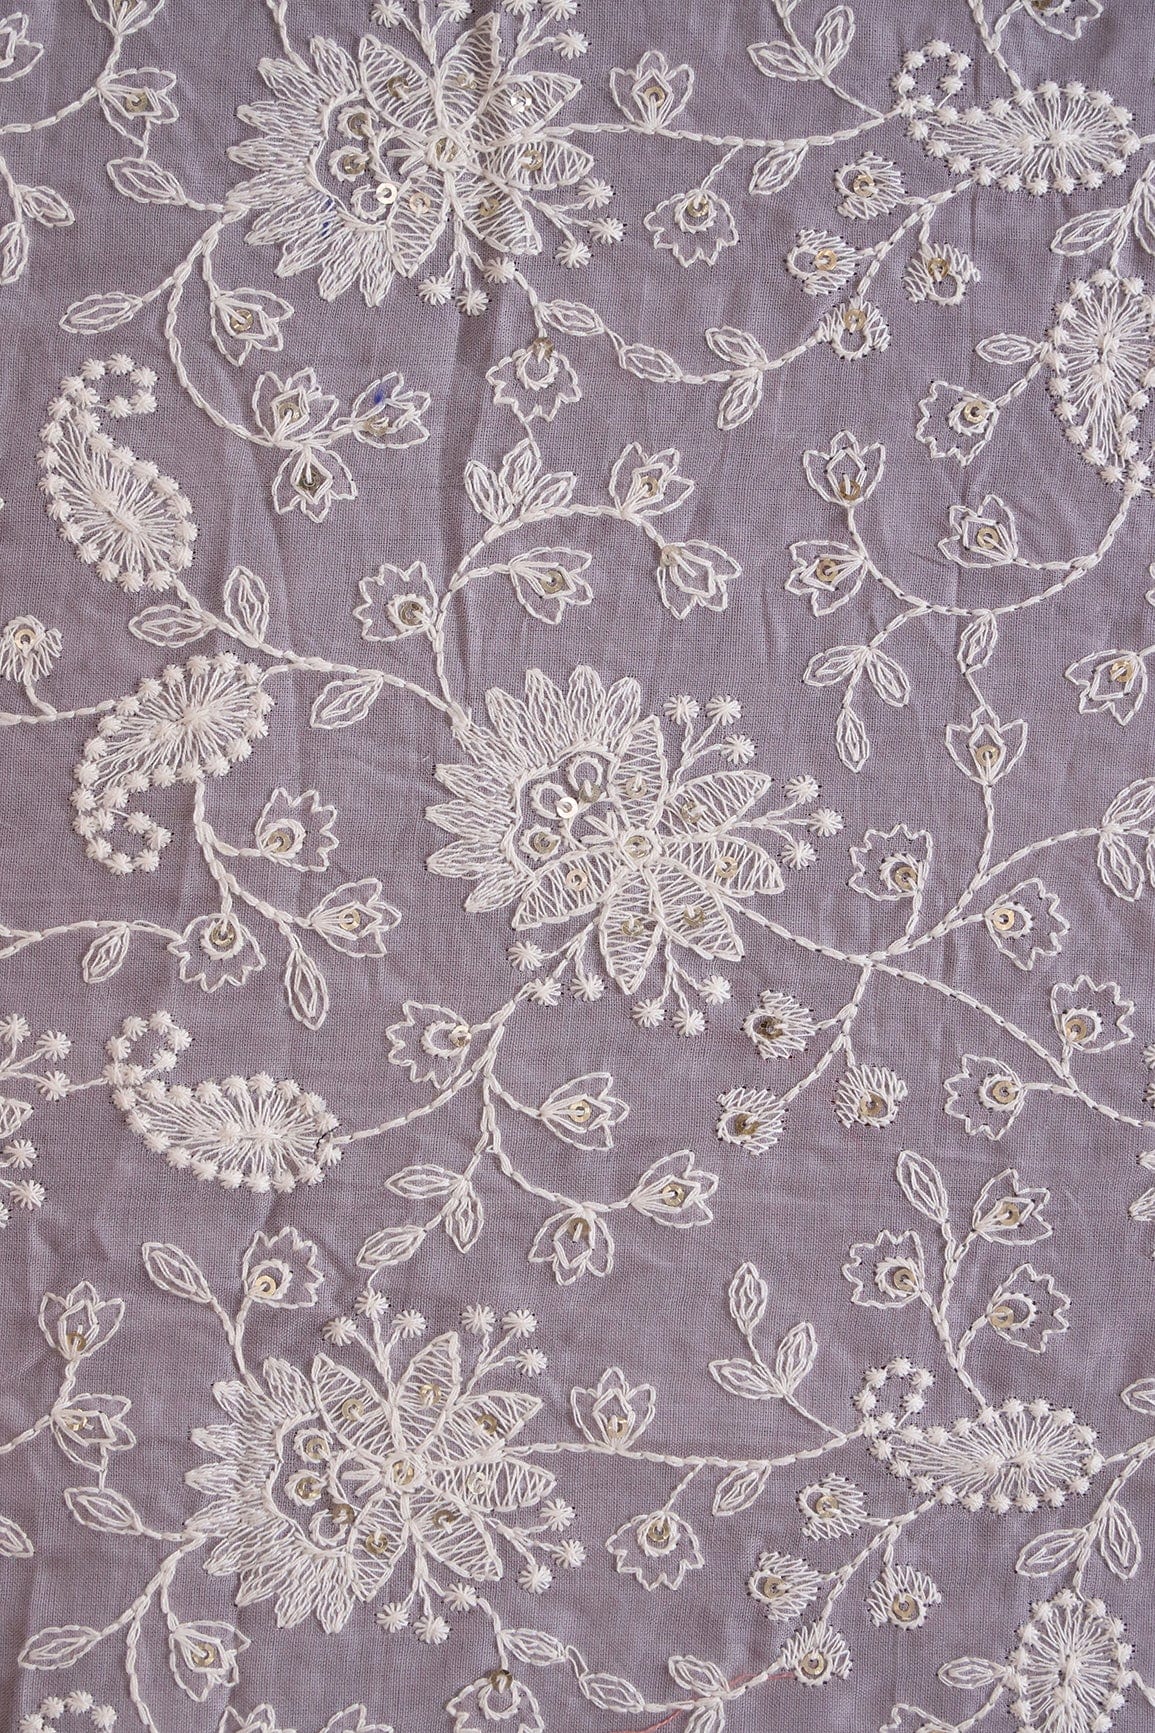 doeraa Embroidery Fabrics Beautiful White Thread With Gold Sequins Lucknowi Floral Embroidery Work On Lavender Soft Cotton Fabric